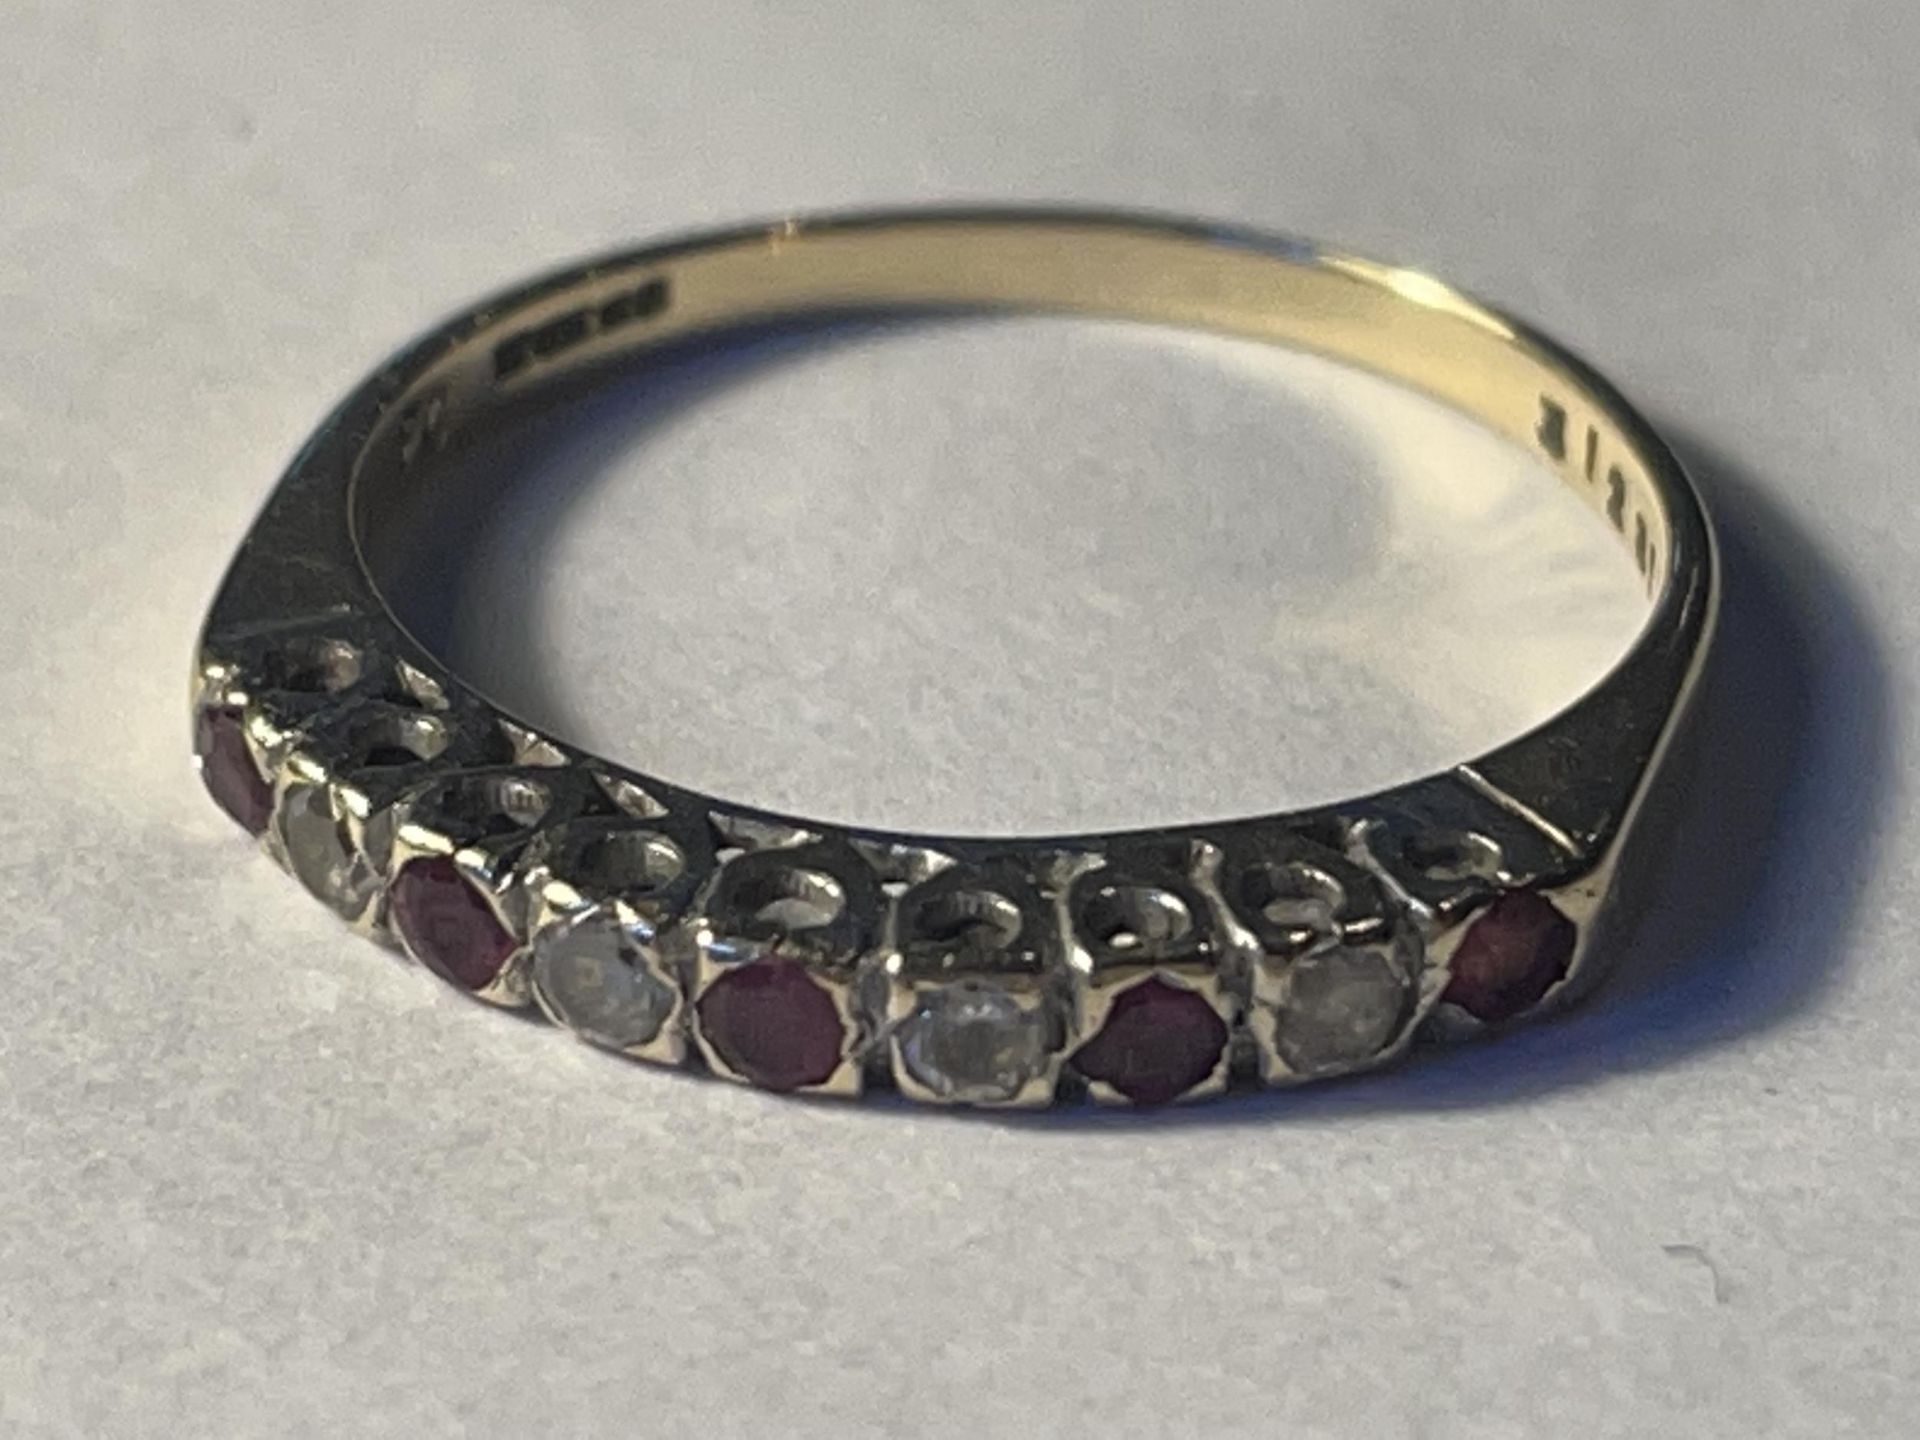 A 9 CARAT GOLD RING WITH FIVE CLEAR STONES AND FOUR REDSTONES IN A LINE GROSS WEIGHT 1.35 GRAMS SIZE